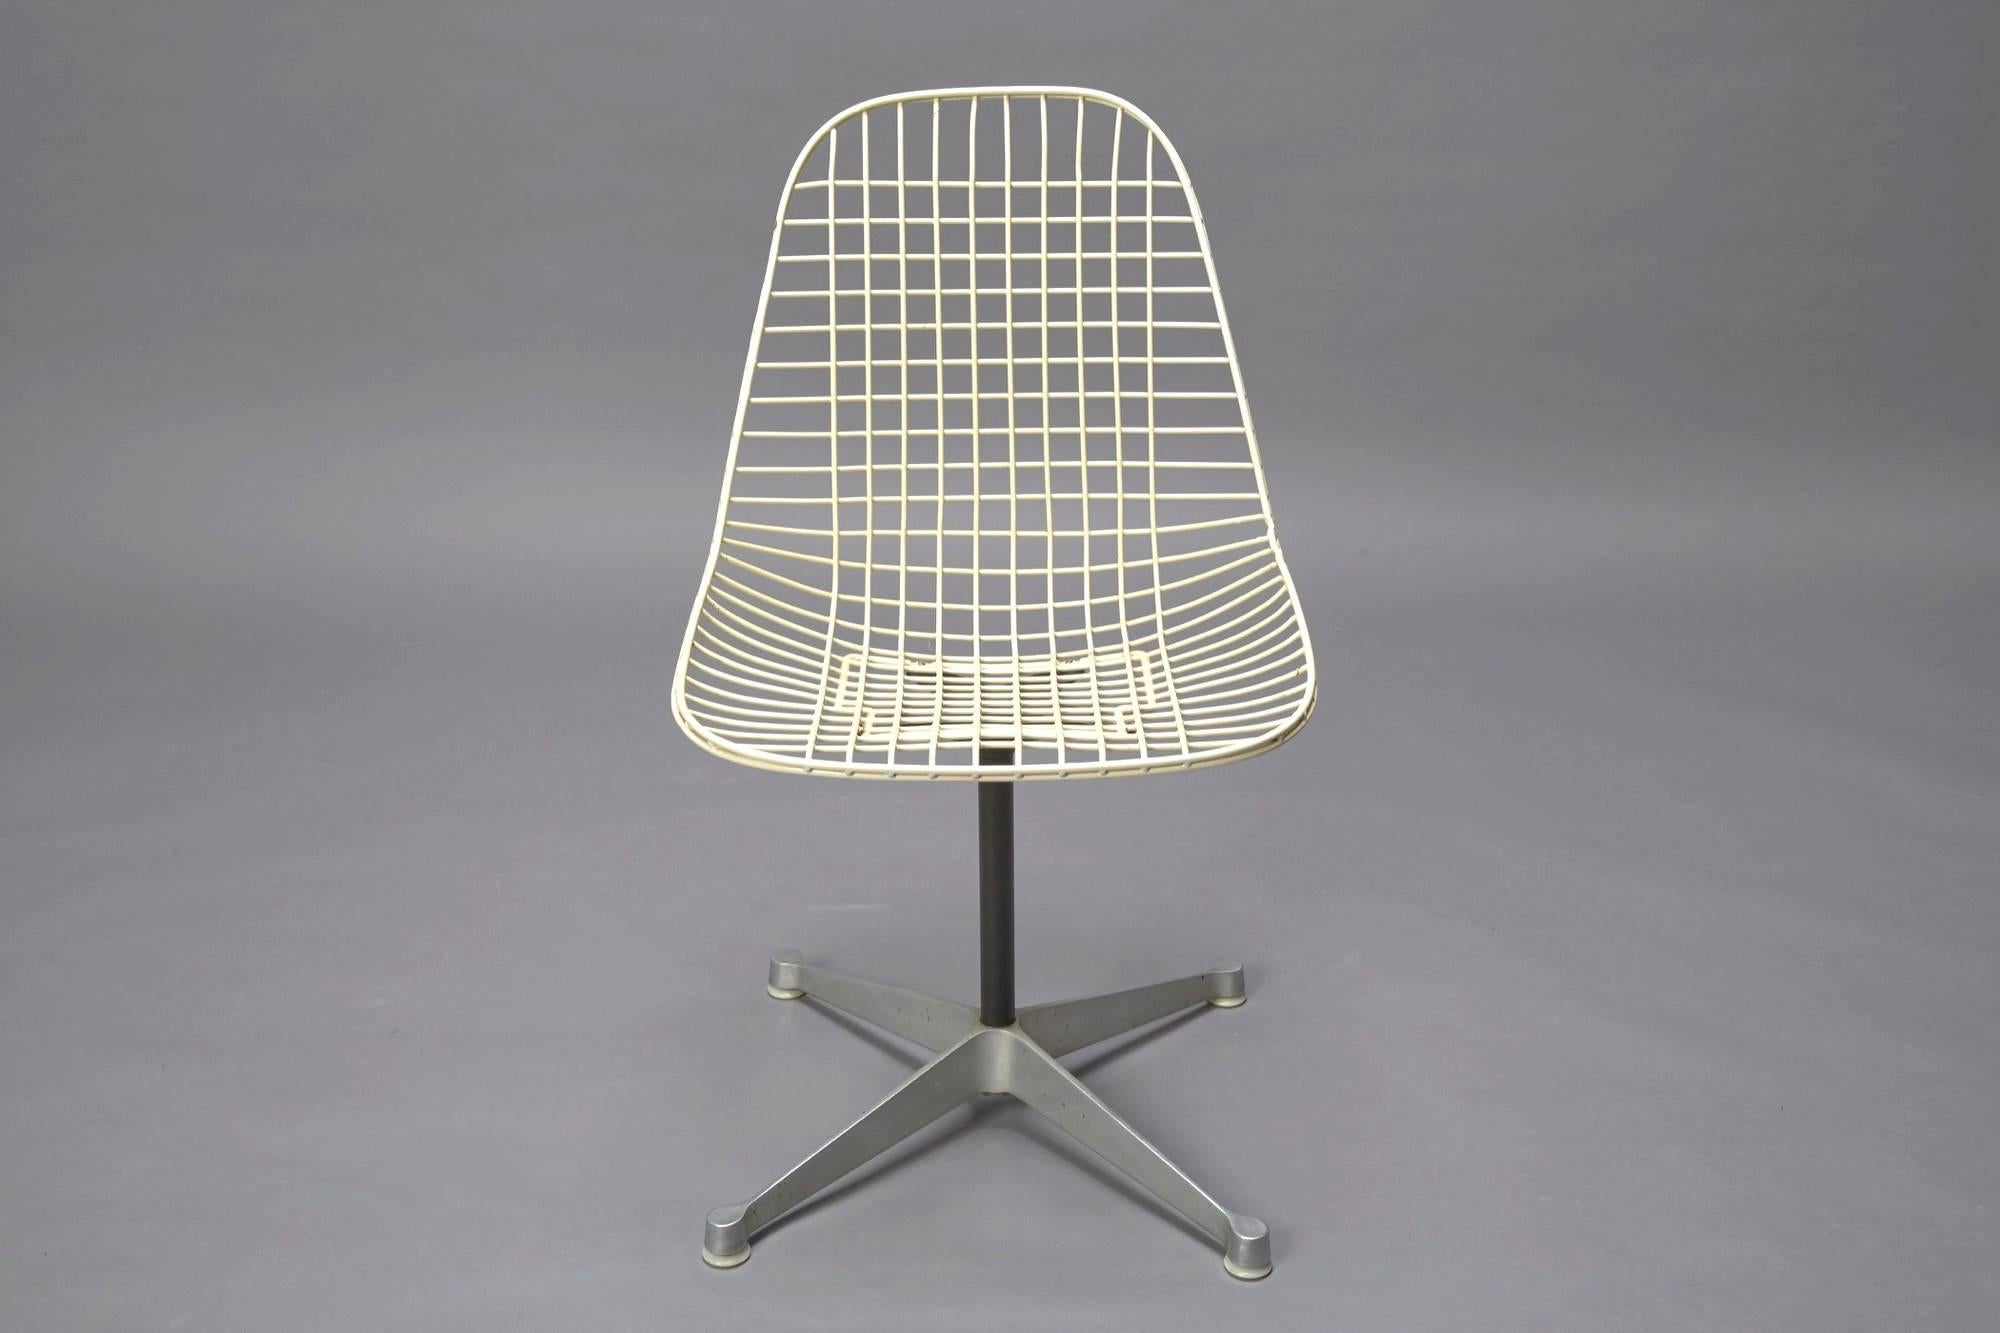 Set of six wire chairs by Charles Eames for Herman Miller.